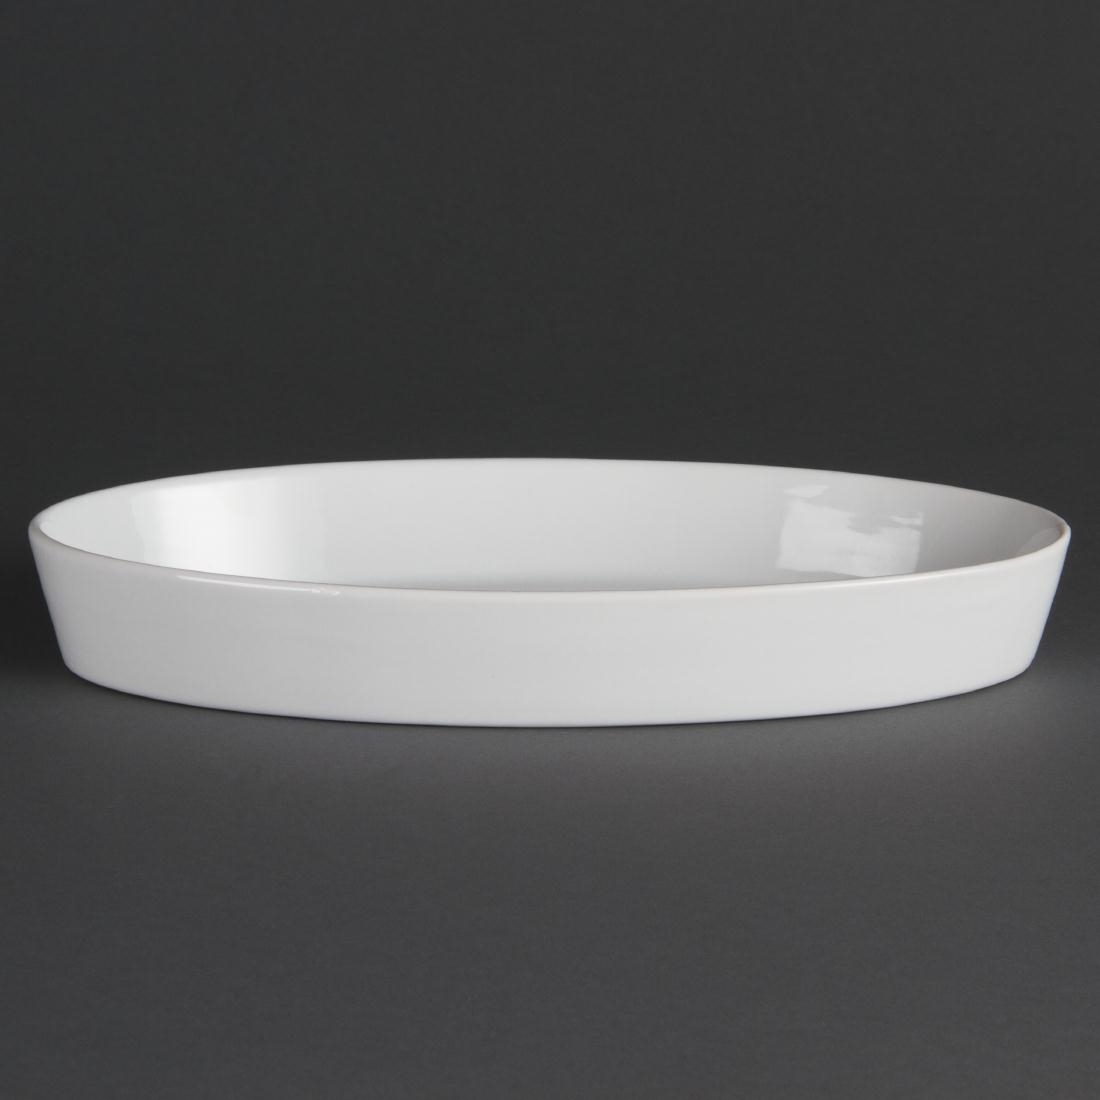 Olympia Whiteware Oval Sole Dishes 283 x 152mm